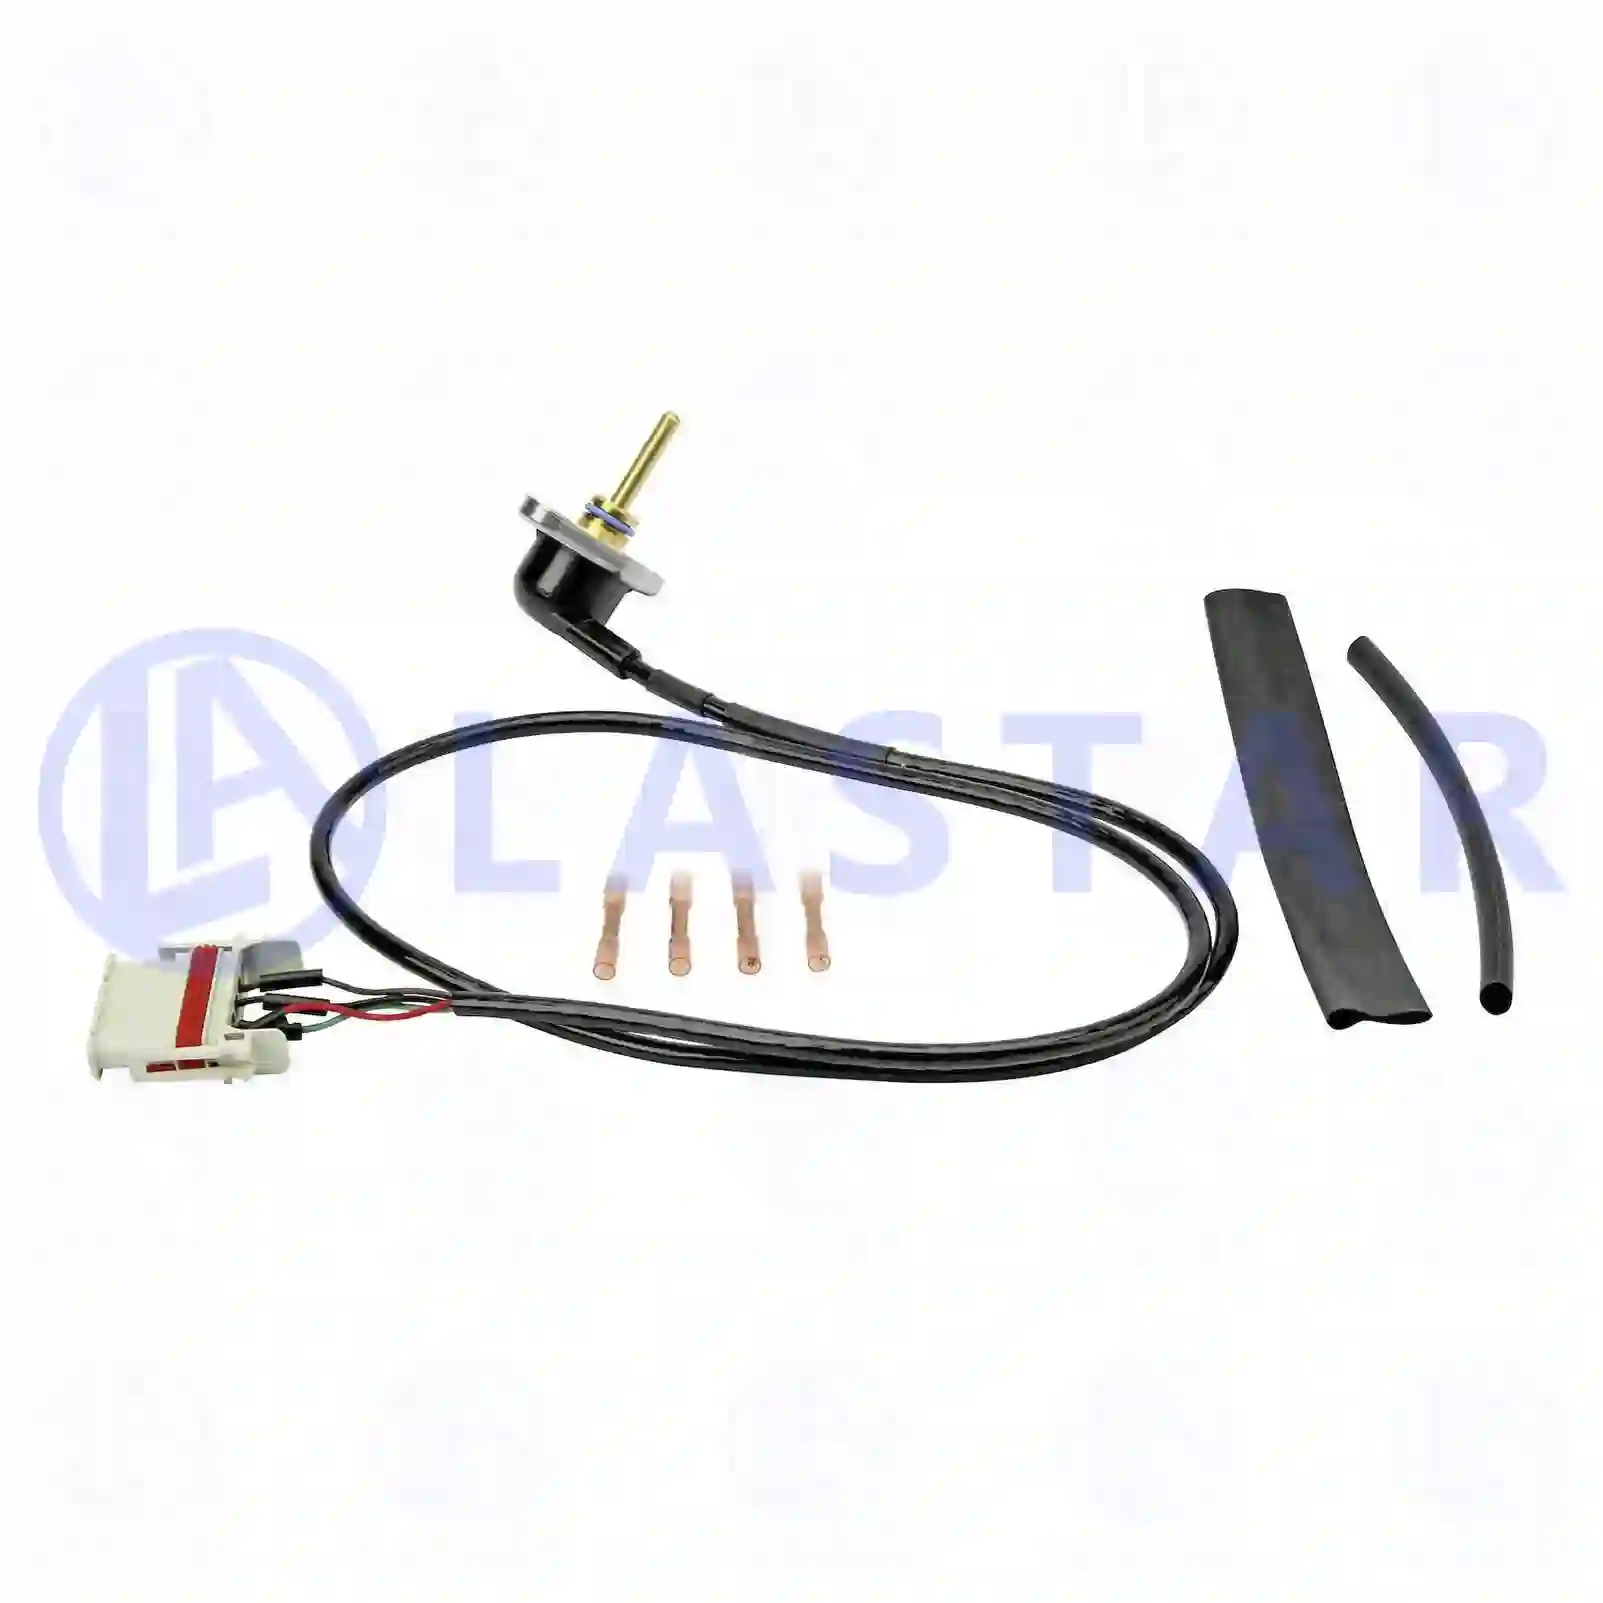 Engine Charge pressure sensor, complete with mounting kit, la no: 77702819 ,  oem no:1457305, 1471740, 1535520, 1787155, 1862787, 1862797, 1862890, 2131817, 2149696, 535520, ZG20357-0008 Lastar Spare Part | Truck Spare Parts, Auotomotive Spare Parts